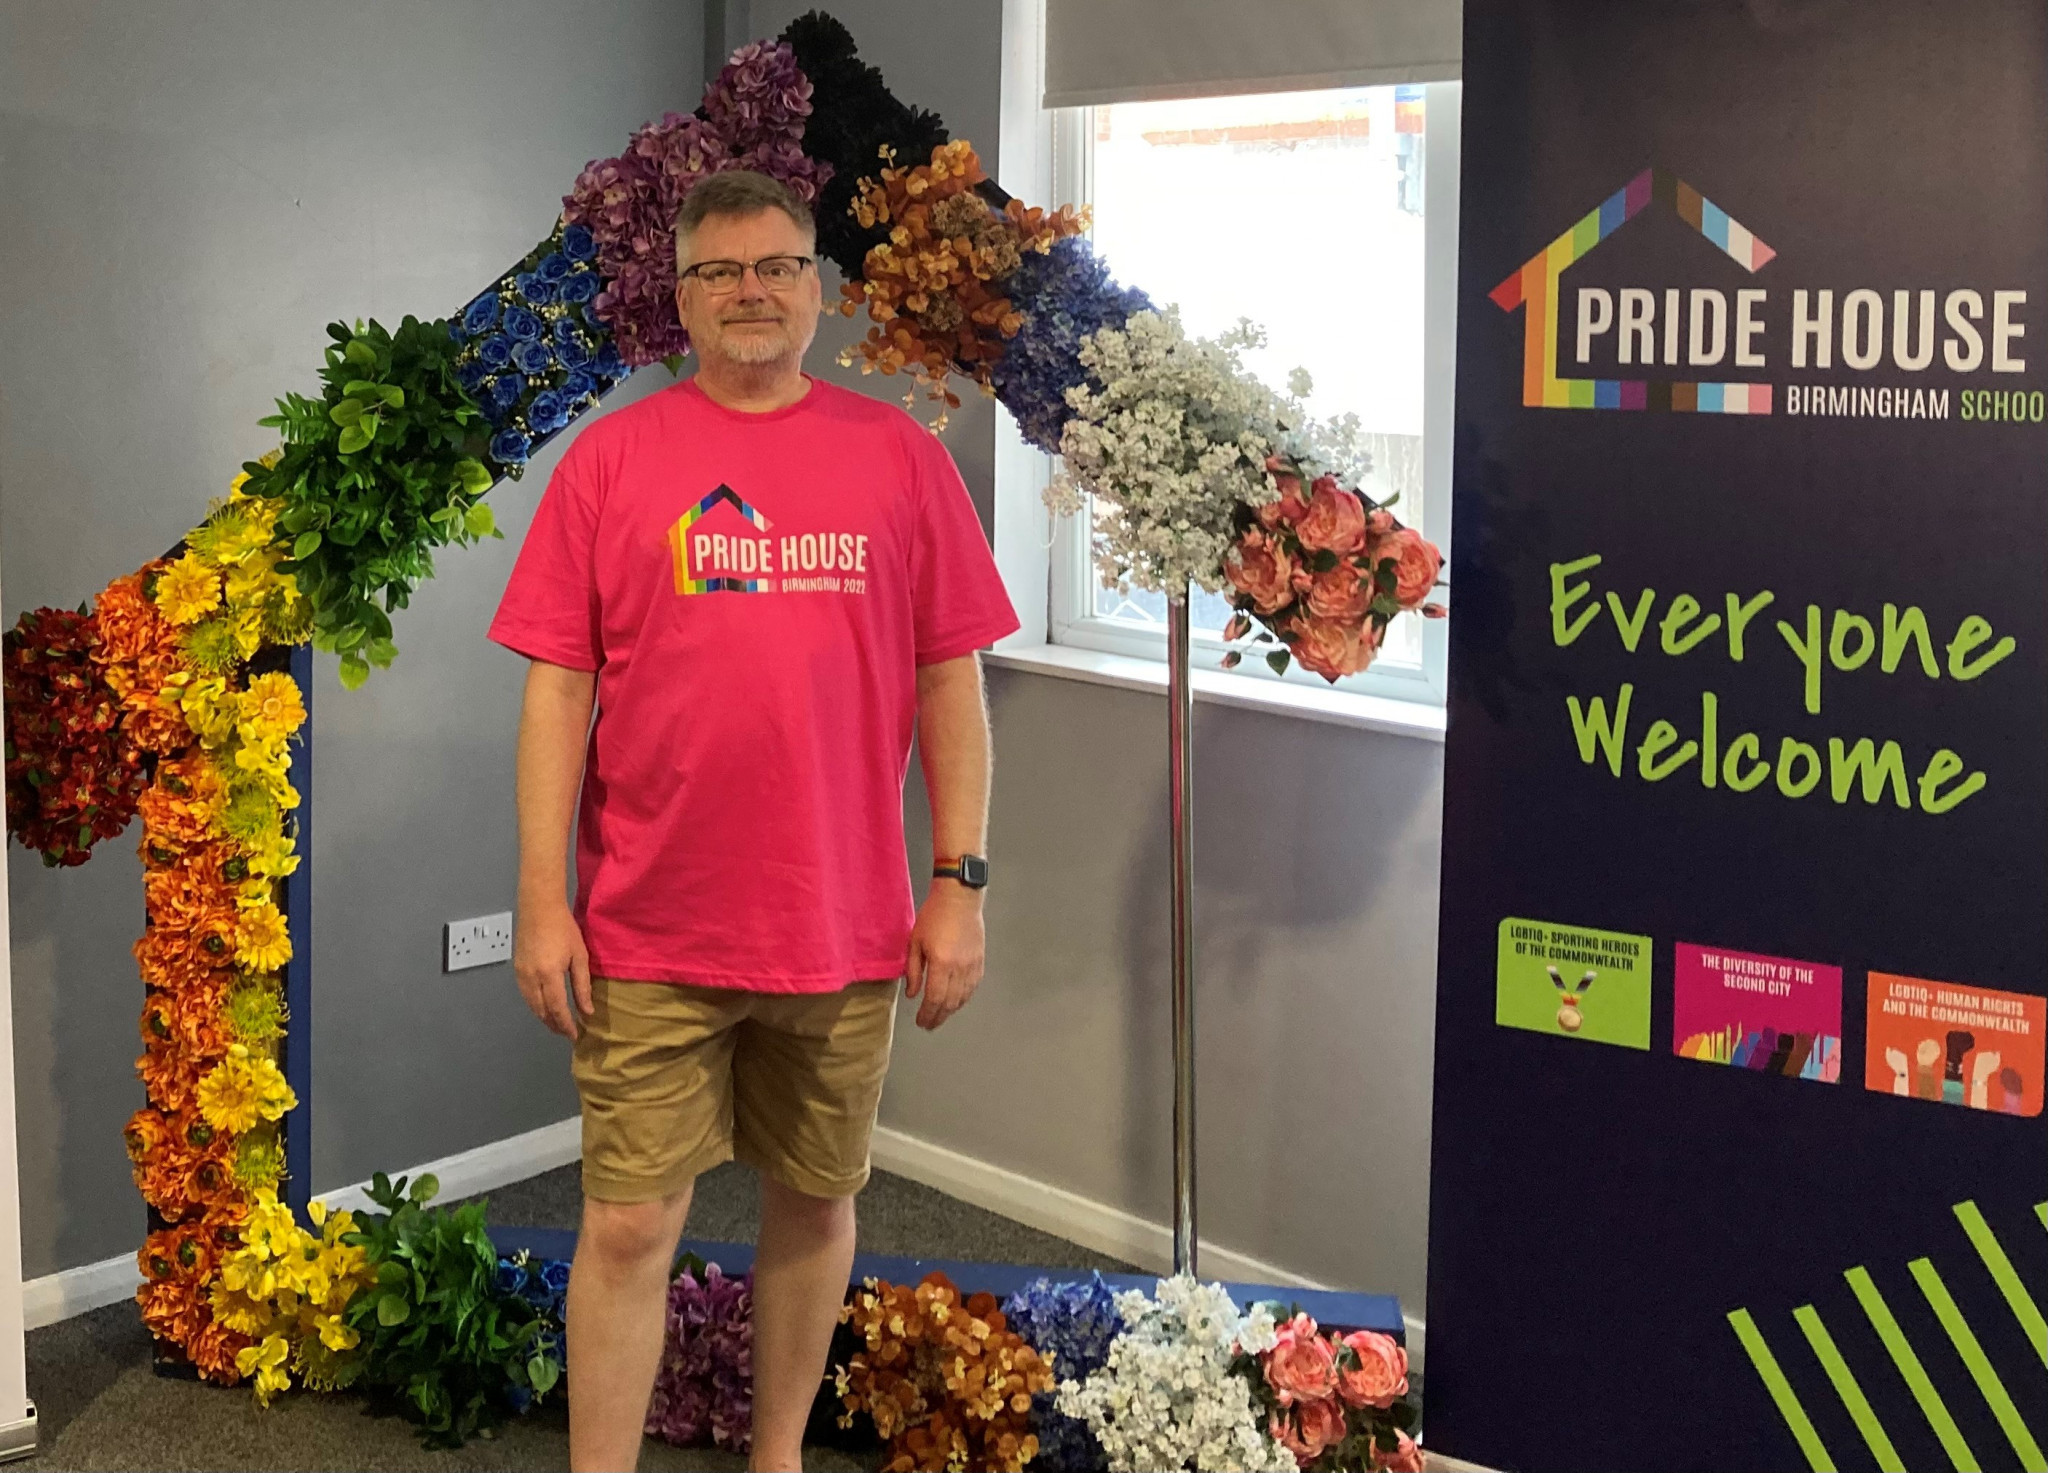 Pride House Birmingham co-founder calls on Commonwealth to "start having these conversations" on LGBTIQ+ laws